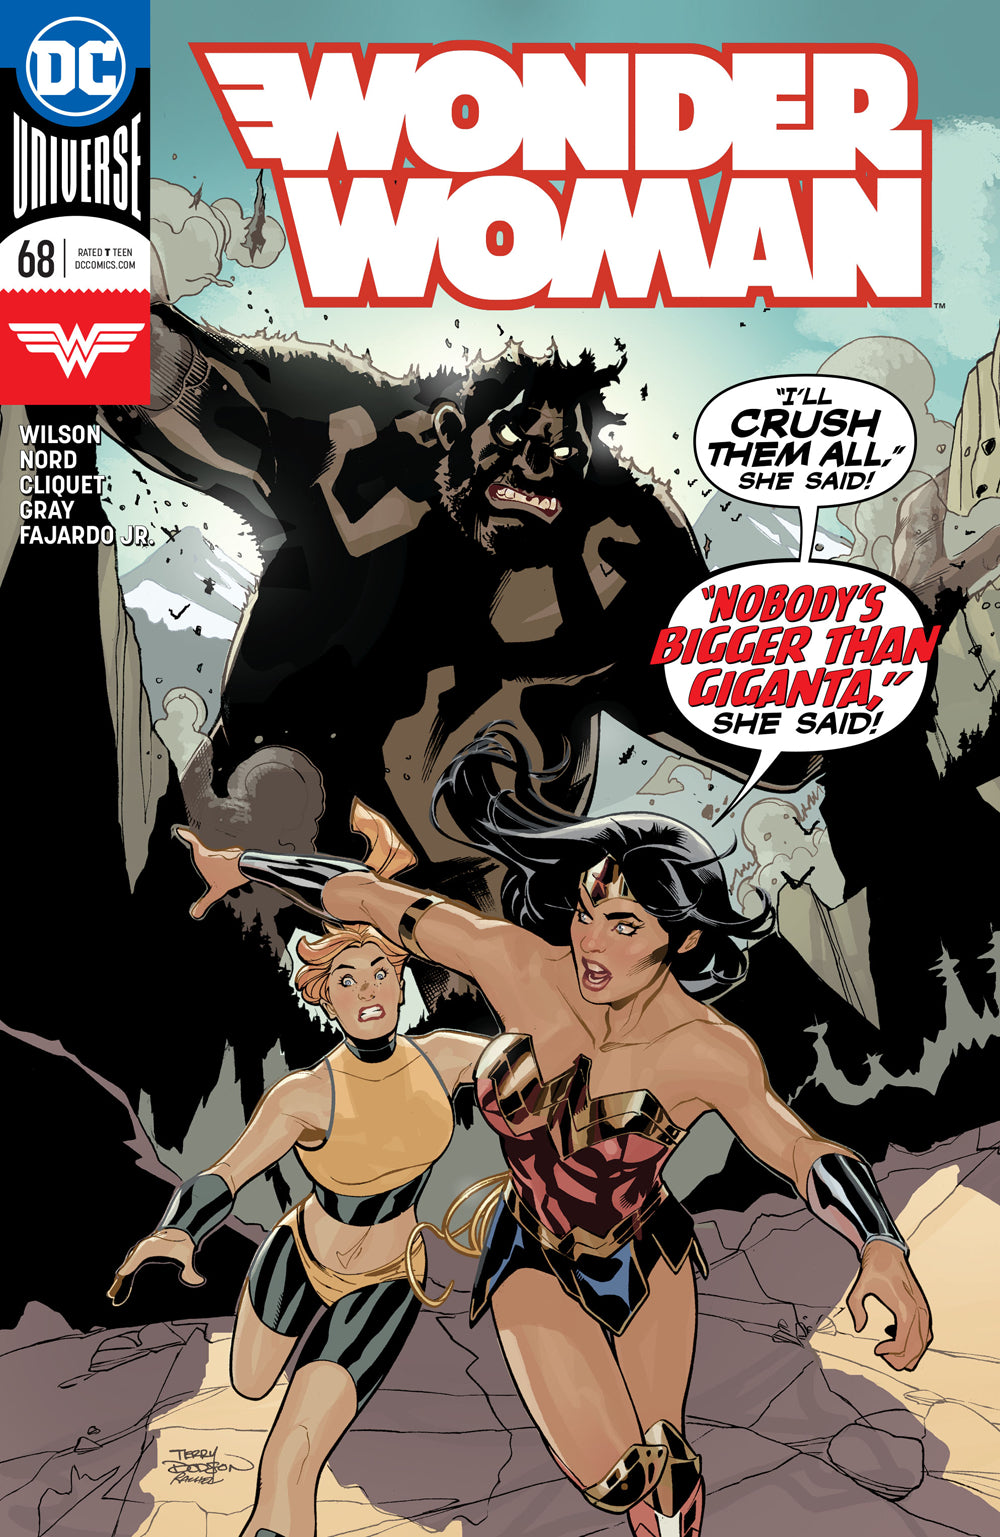 WONDER WOMAN #68 | Game Master's Emporium (The New GME)